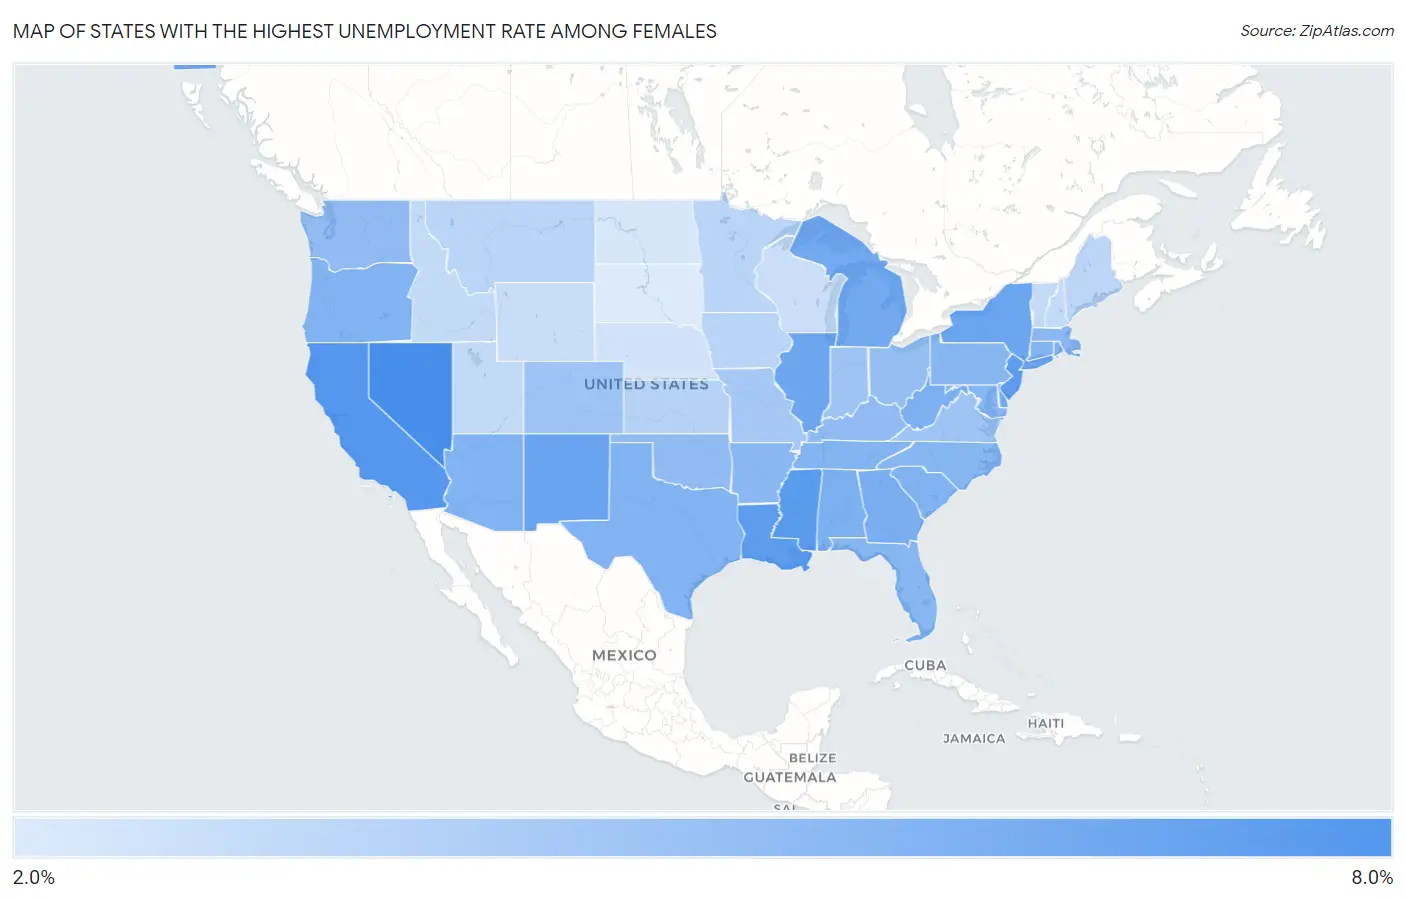 States with the Highest Unemployment Rate Among Females in the United States Map